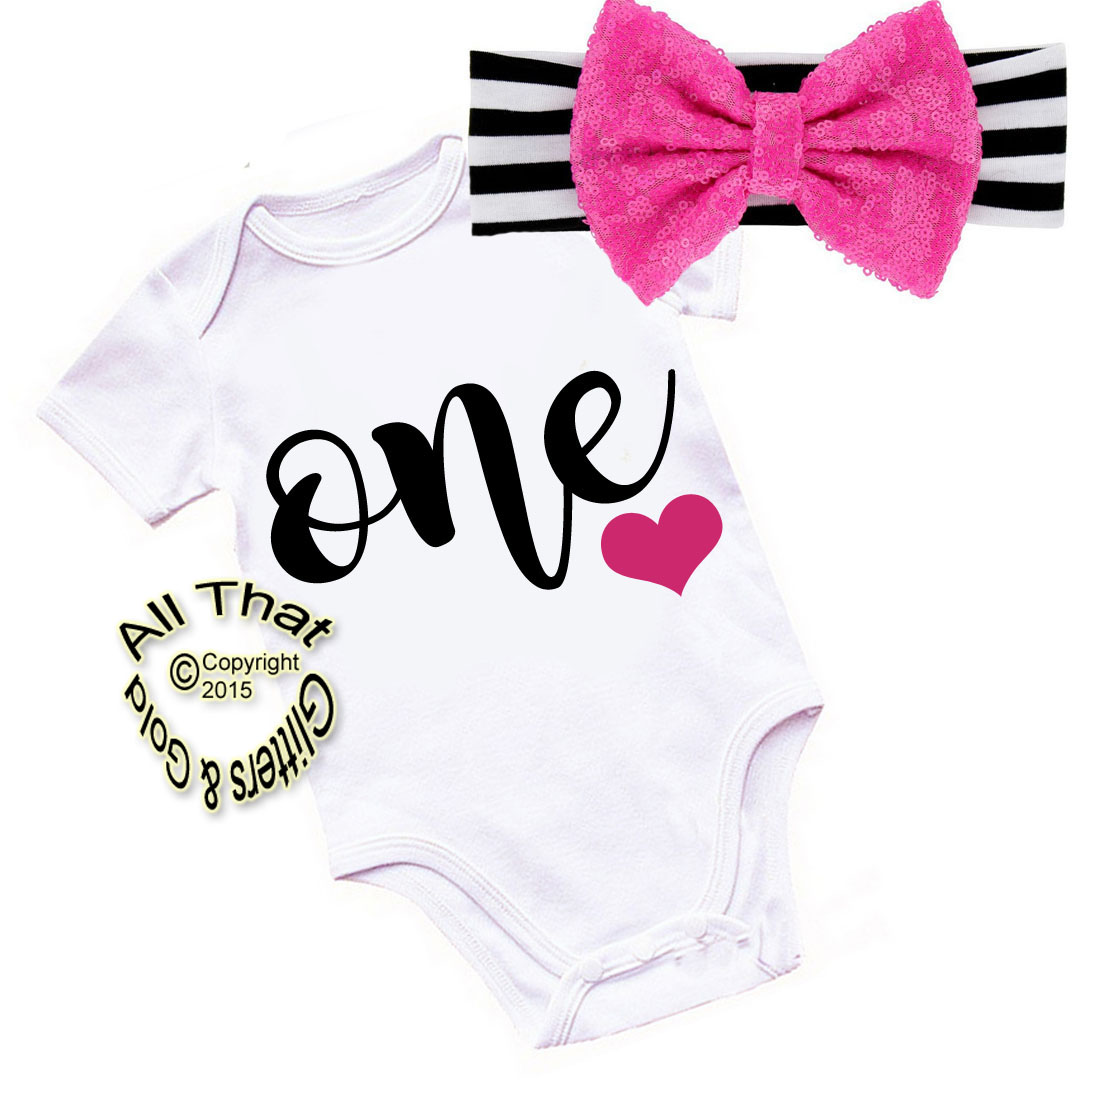 Black, Hot Pink and White One Year Old Shirt or Outfit For 1st Birthday